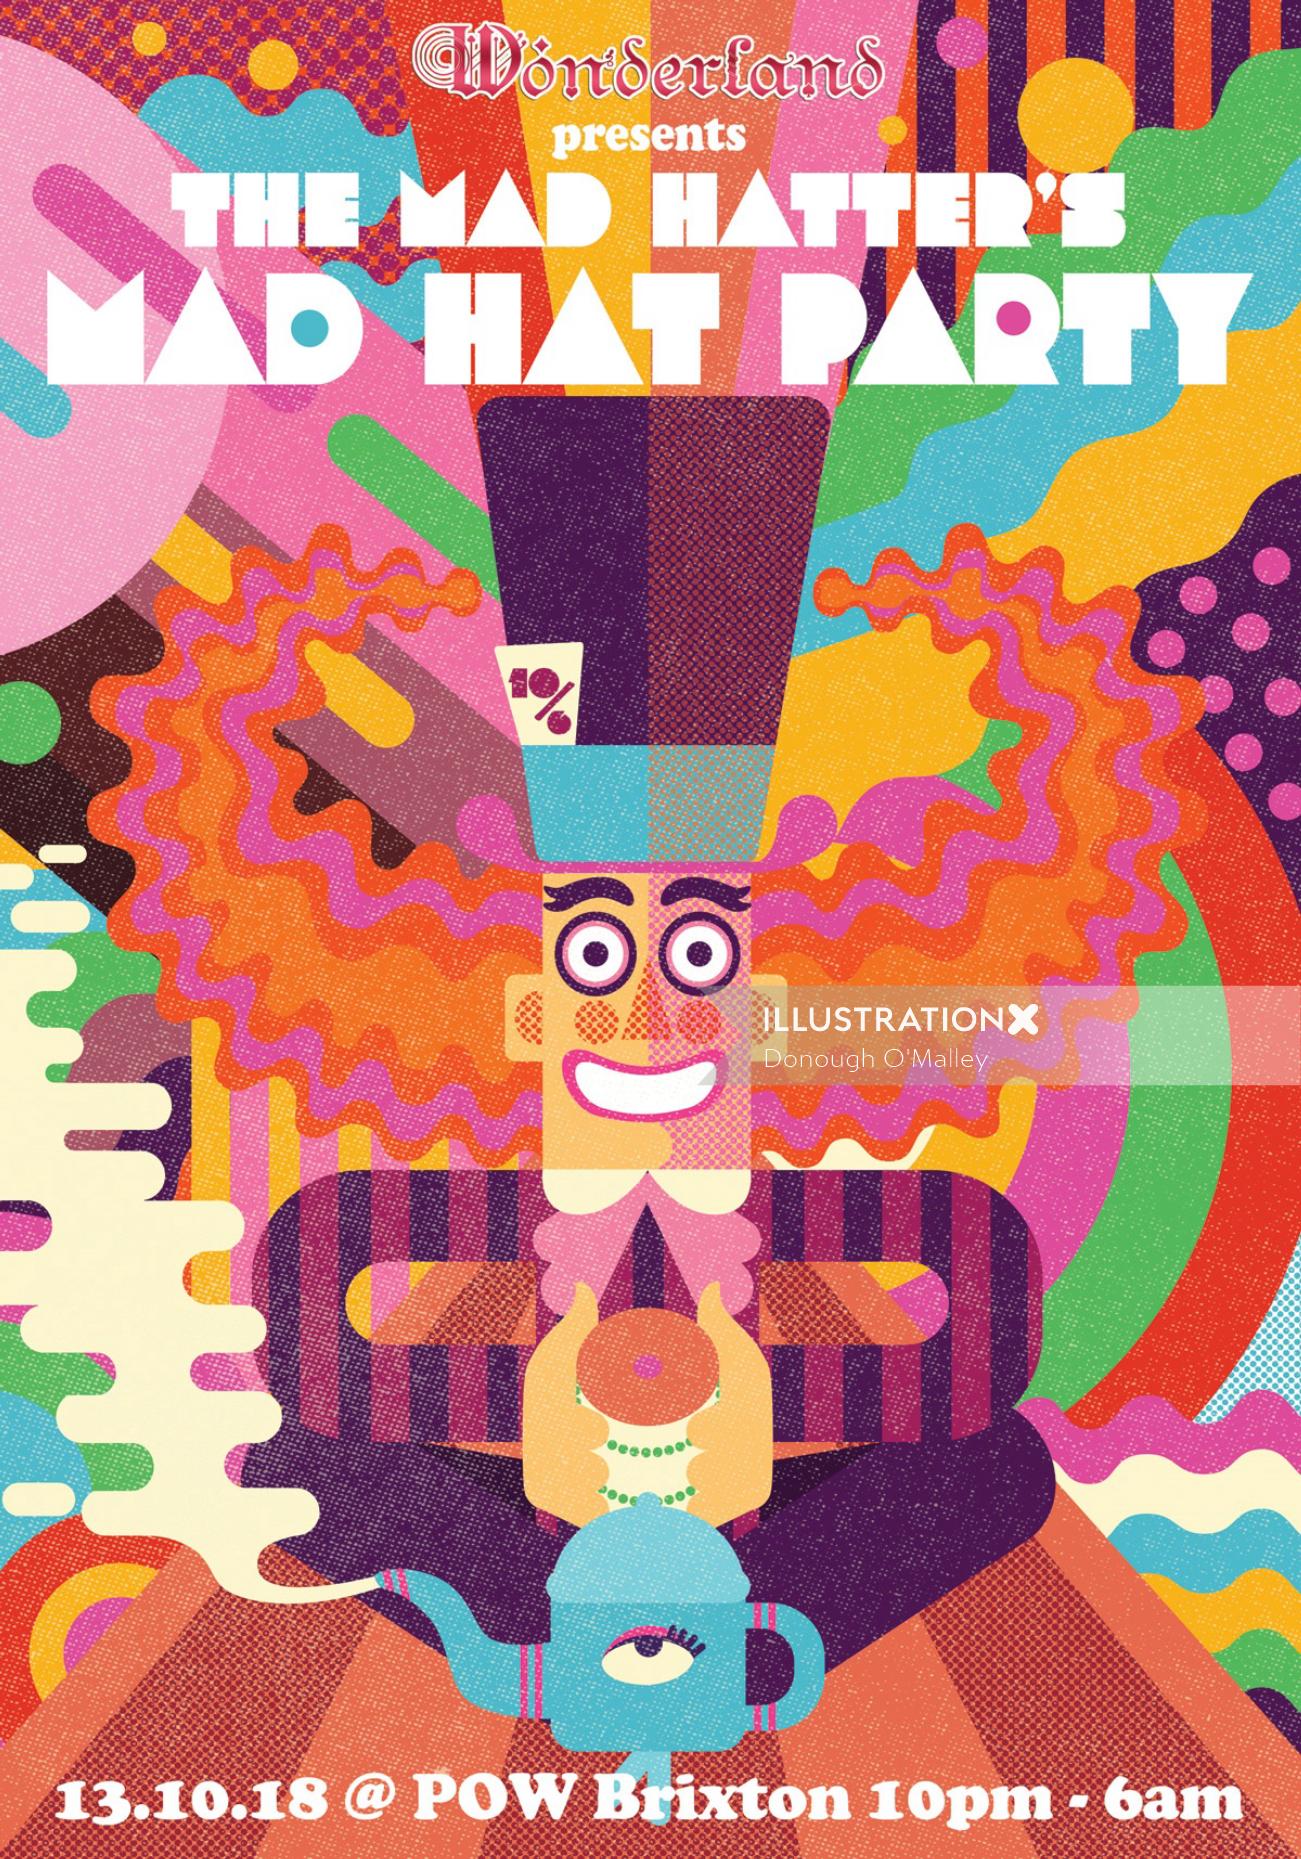 The Mad Hatter's Mad Hat Party poster design 